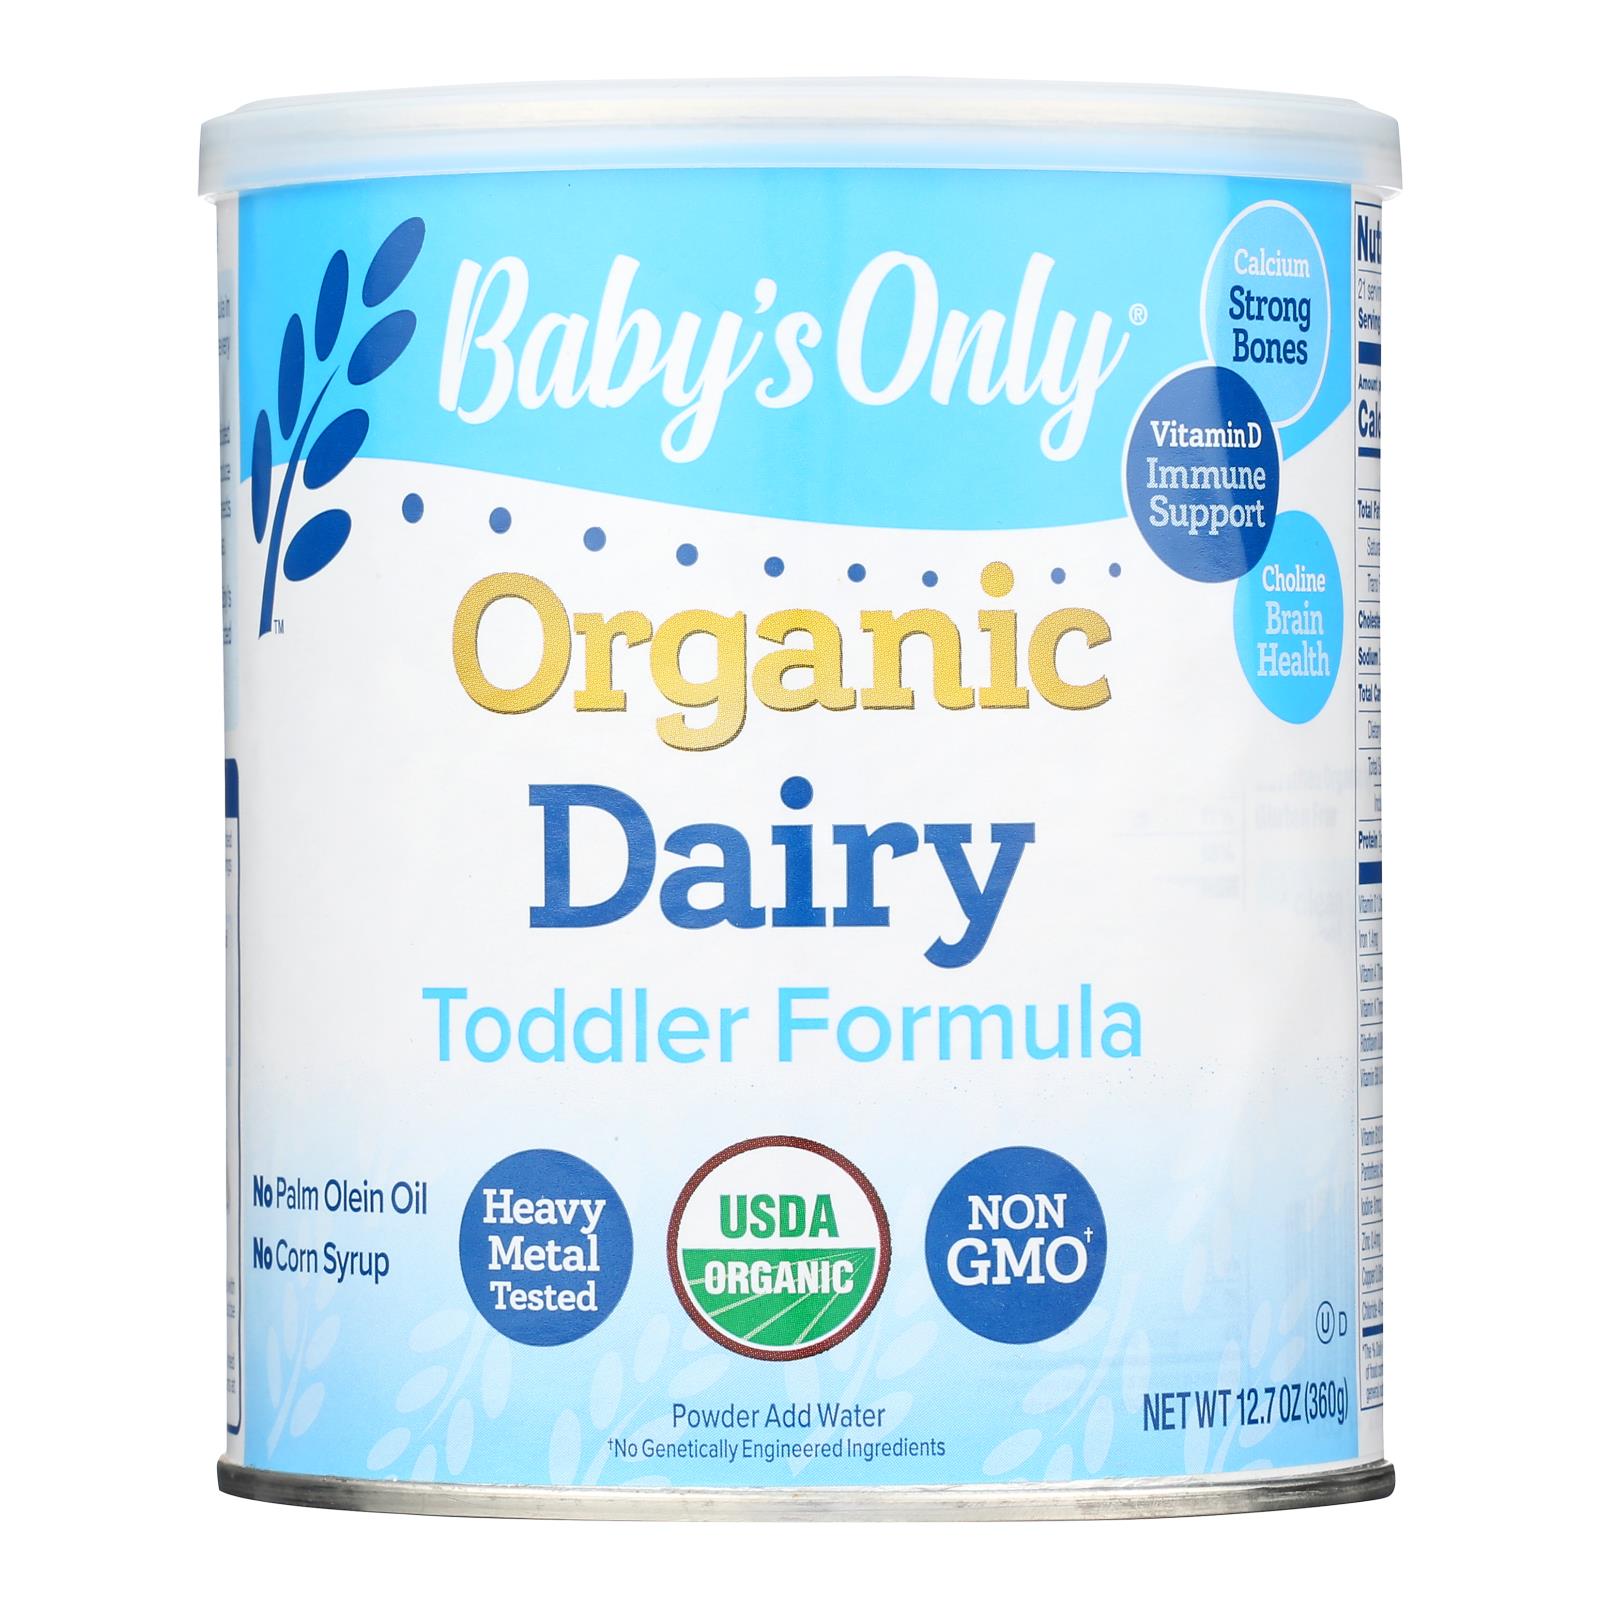 Baby's Only Organic Dairy Iron Fortified Toddler Formula - Case of 6 - 12.7 oz.